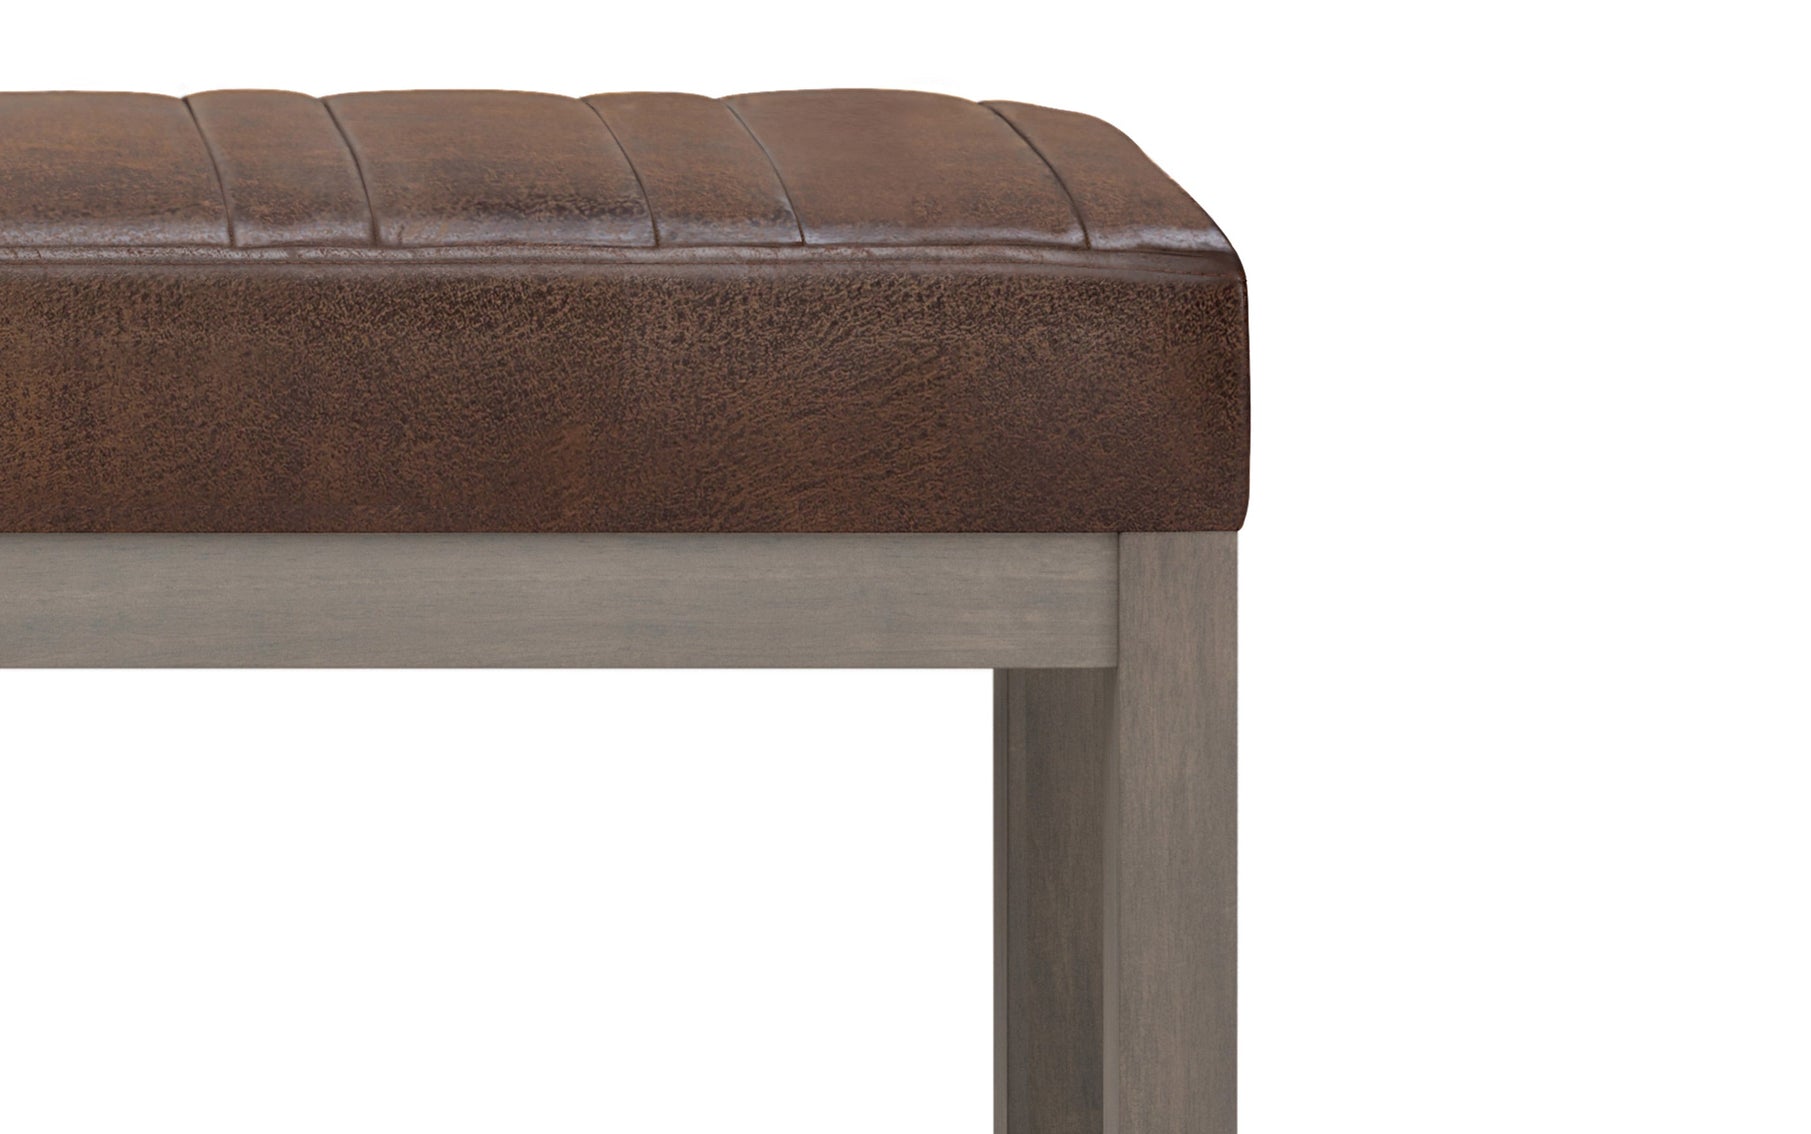 Distressed Chestnut Brown Distressed Vegan Leather | Casey Ottoman Bench